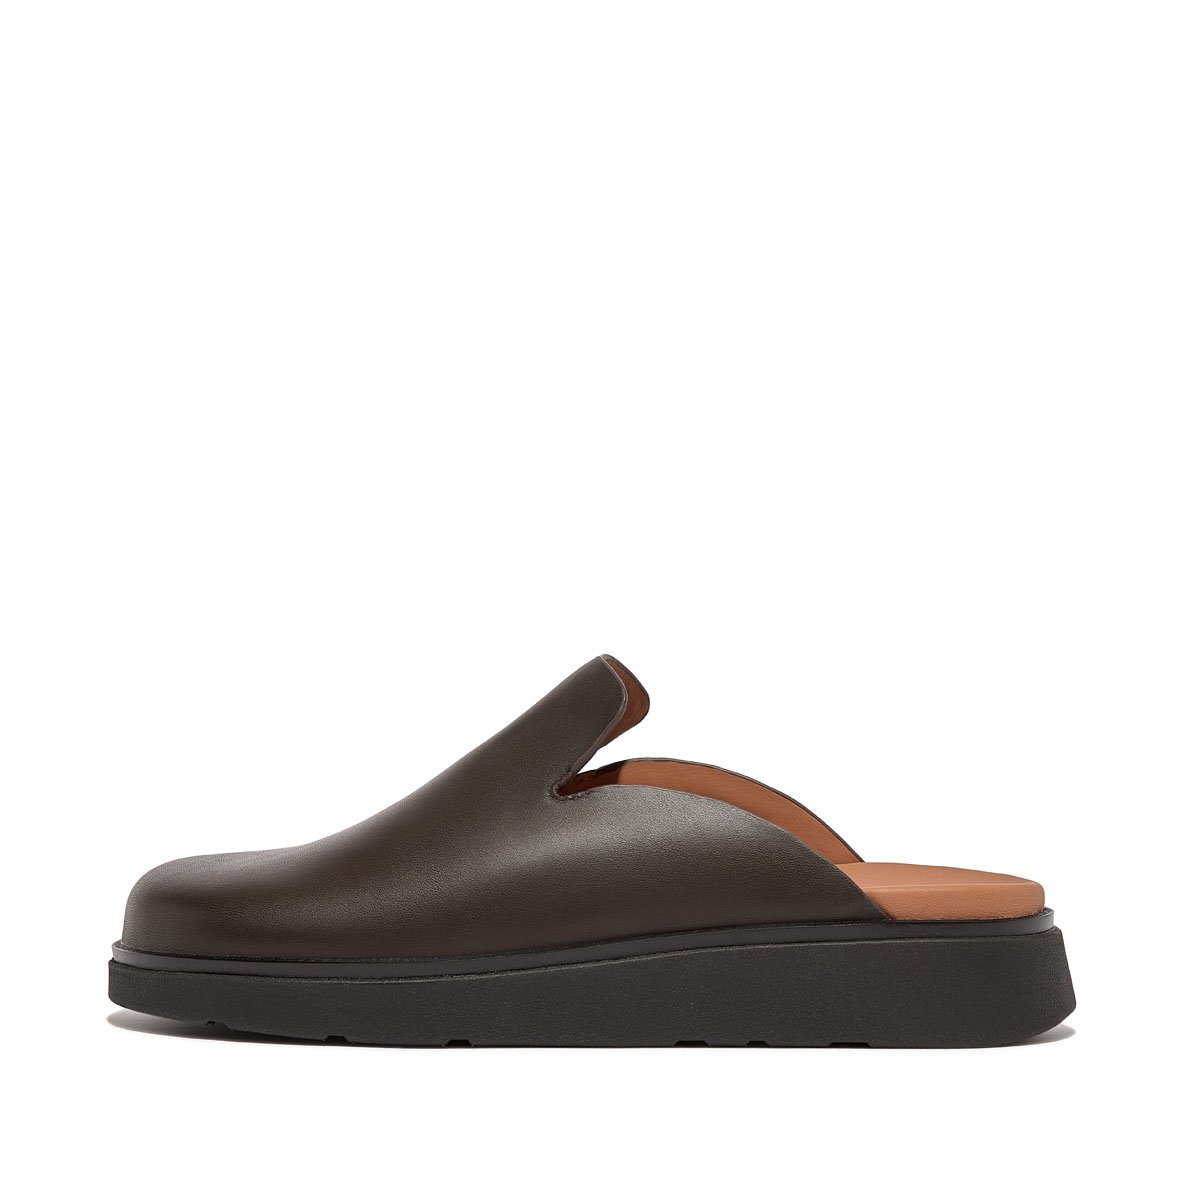 GEN-FF Men's Leather Mules - Chocolate Brown (GU3-167) | FitFlop Singapore